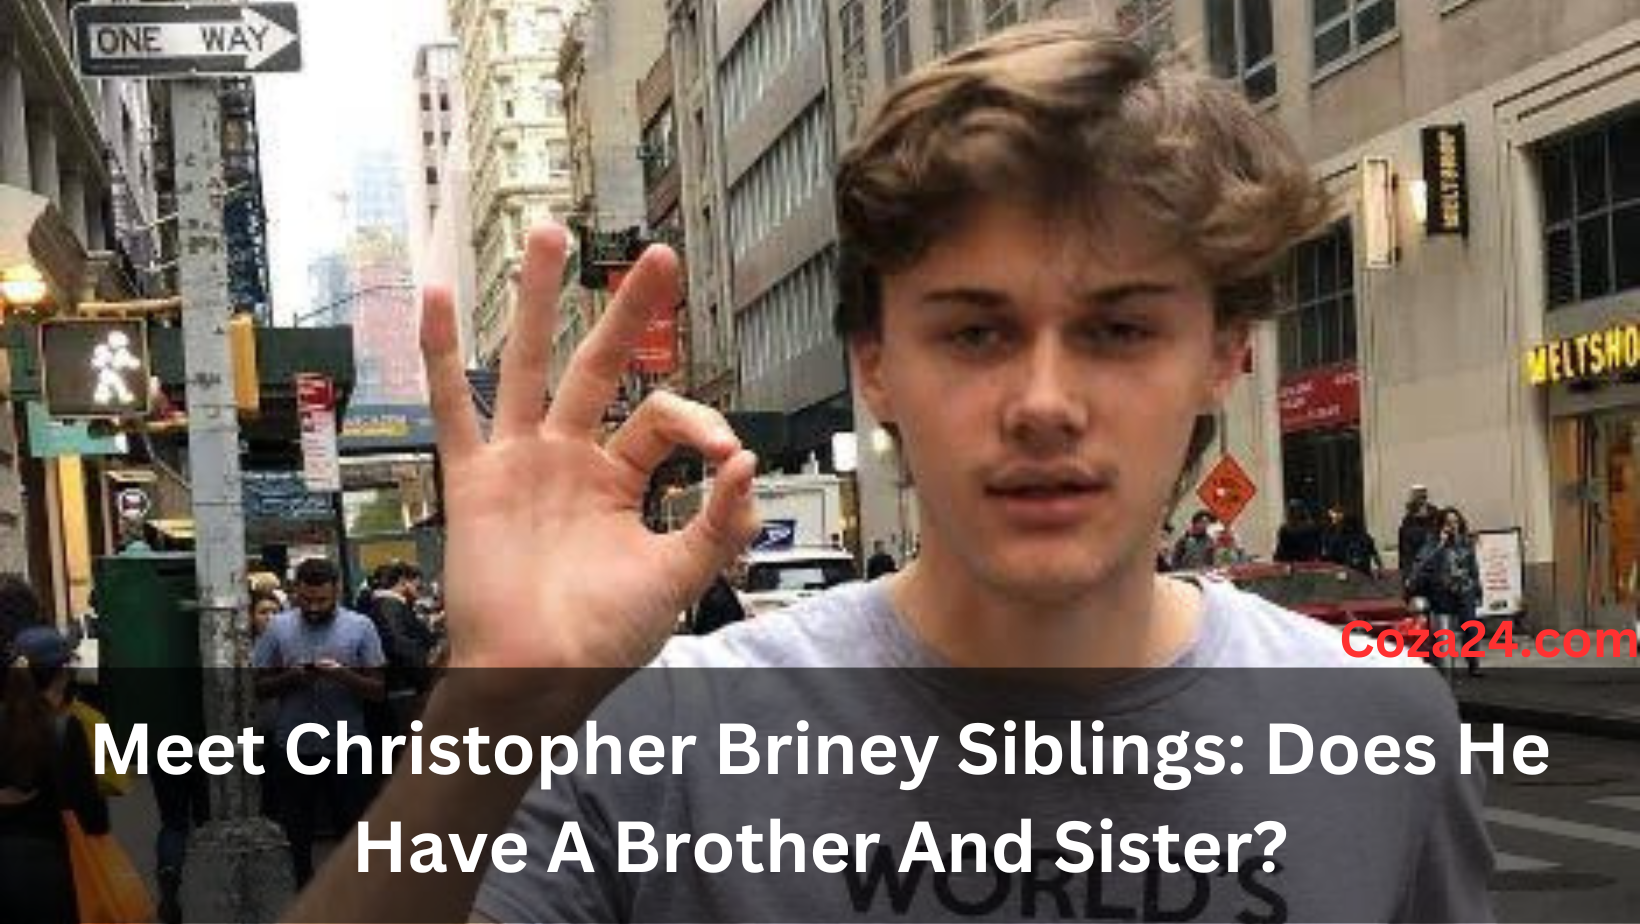 Meet Christopher Briney Siblings: Does He Have A Brother And Sister?